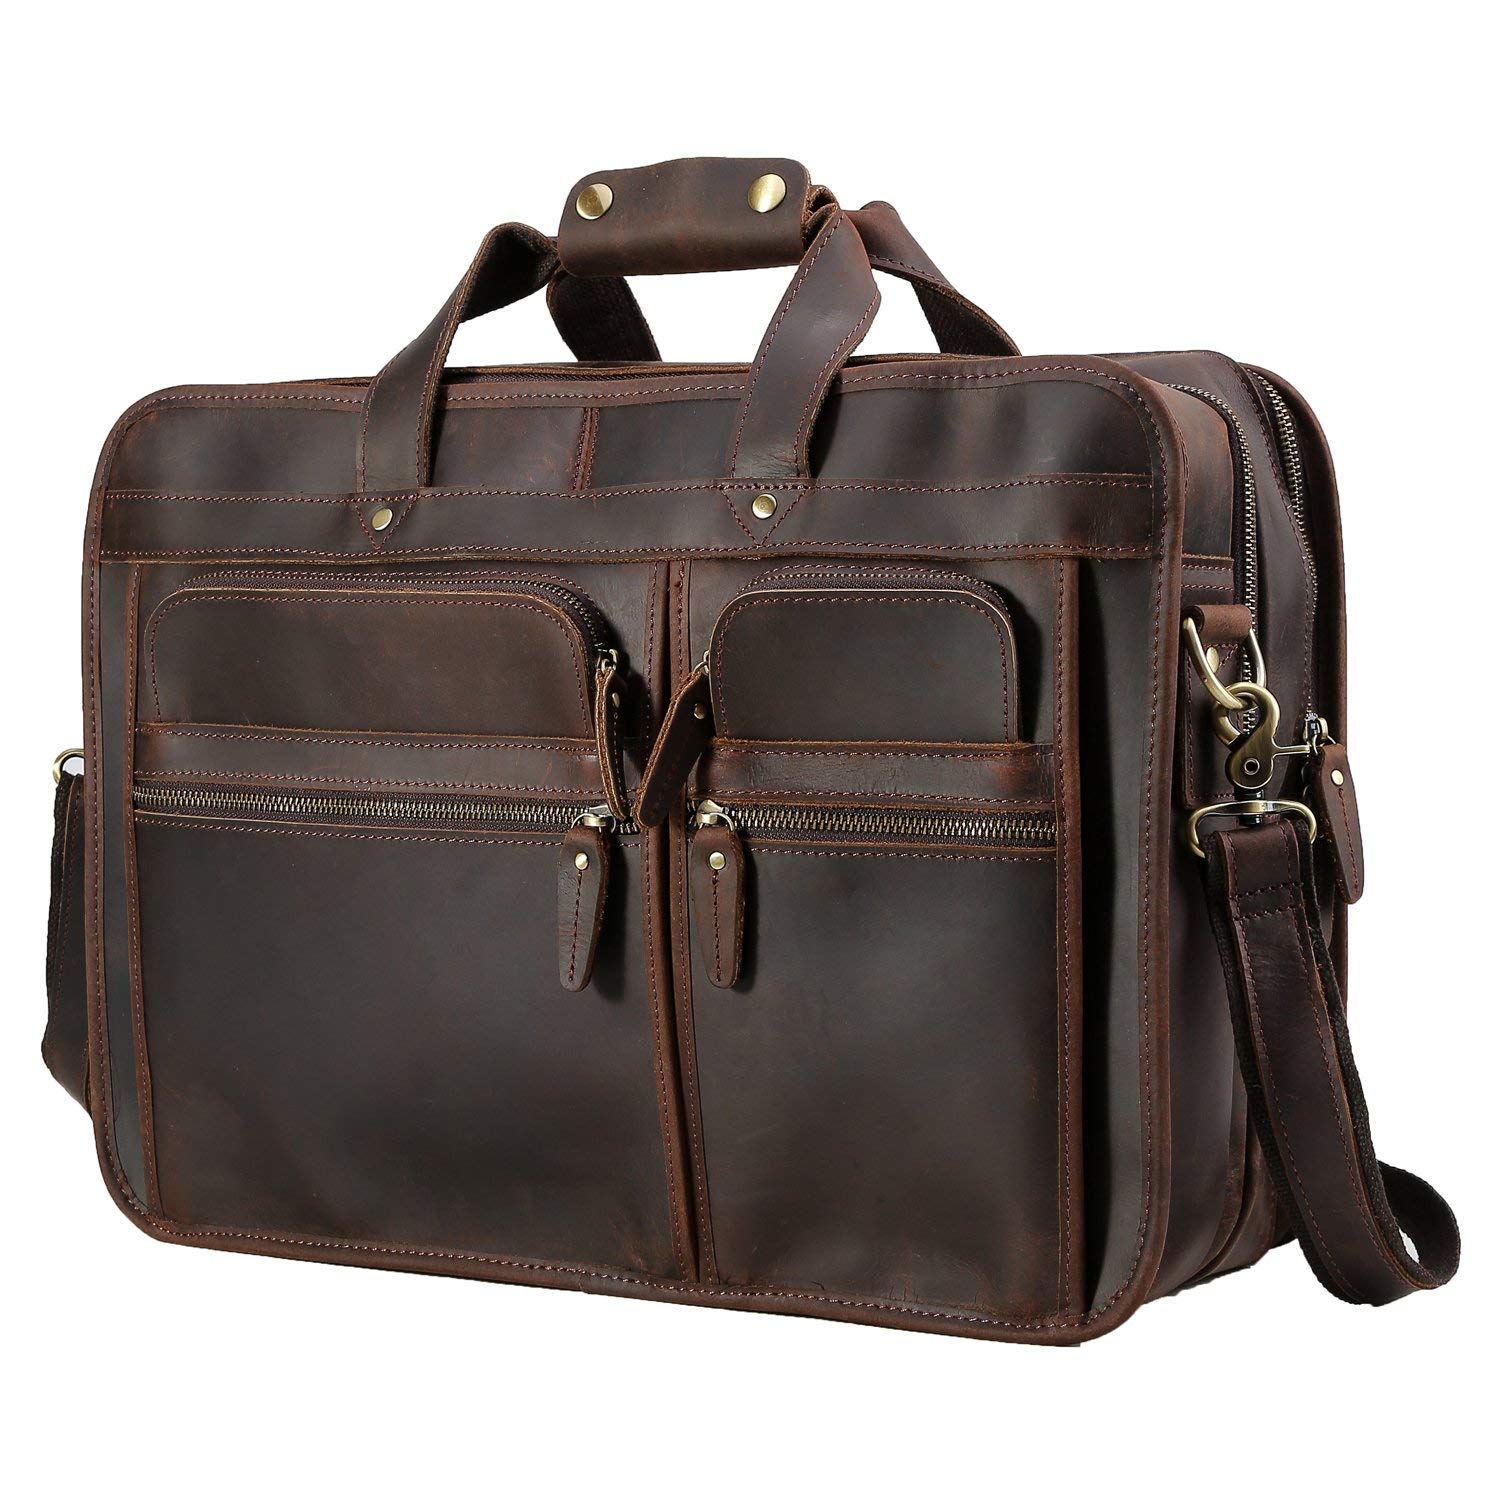 The 10 Best Leather Briefcases for Men 2022 - Luggage & Travel